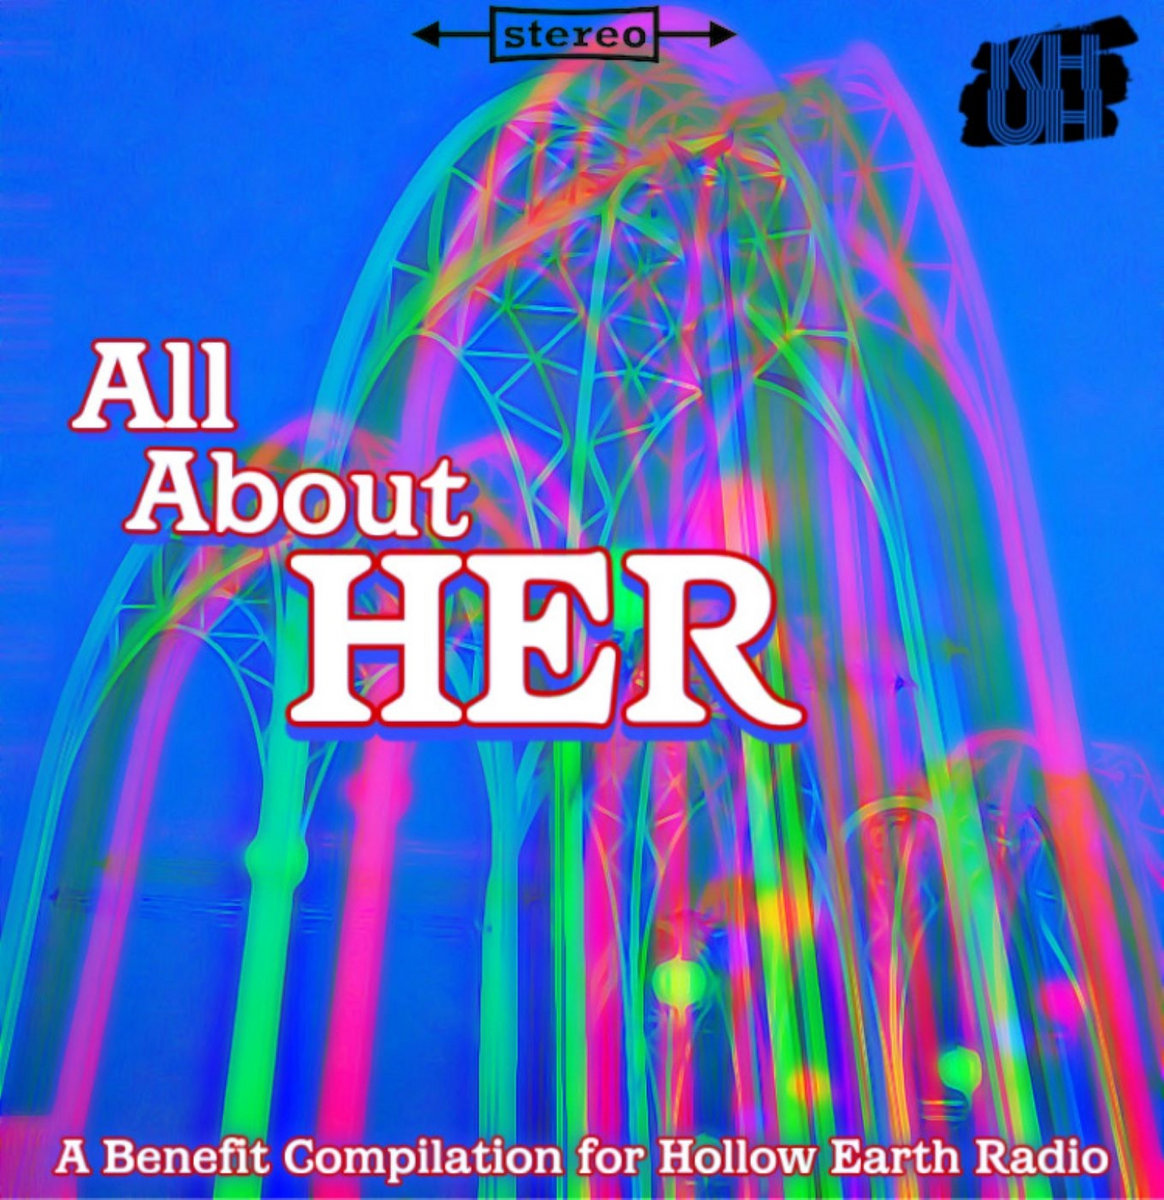 New Releases // All About HER (a benefit compilation for Hollow Earth Radio)